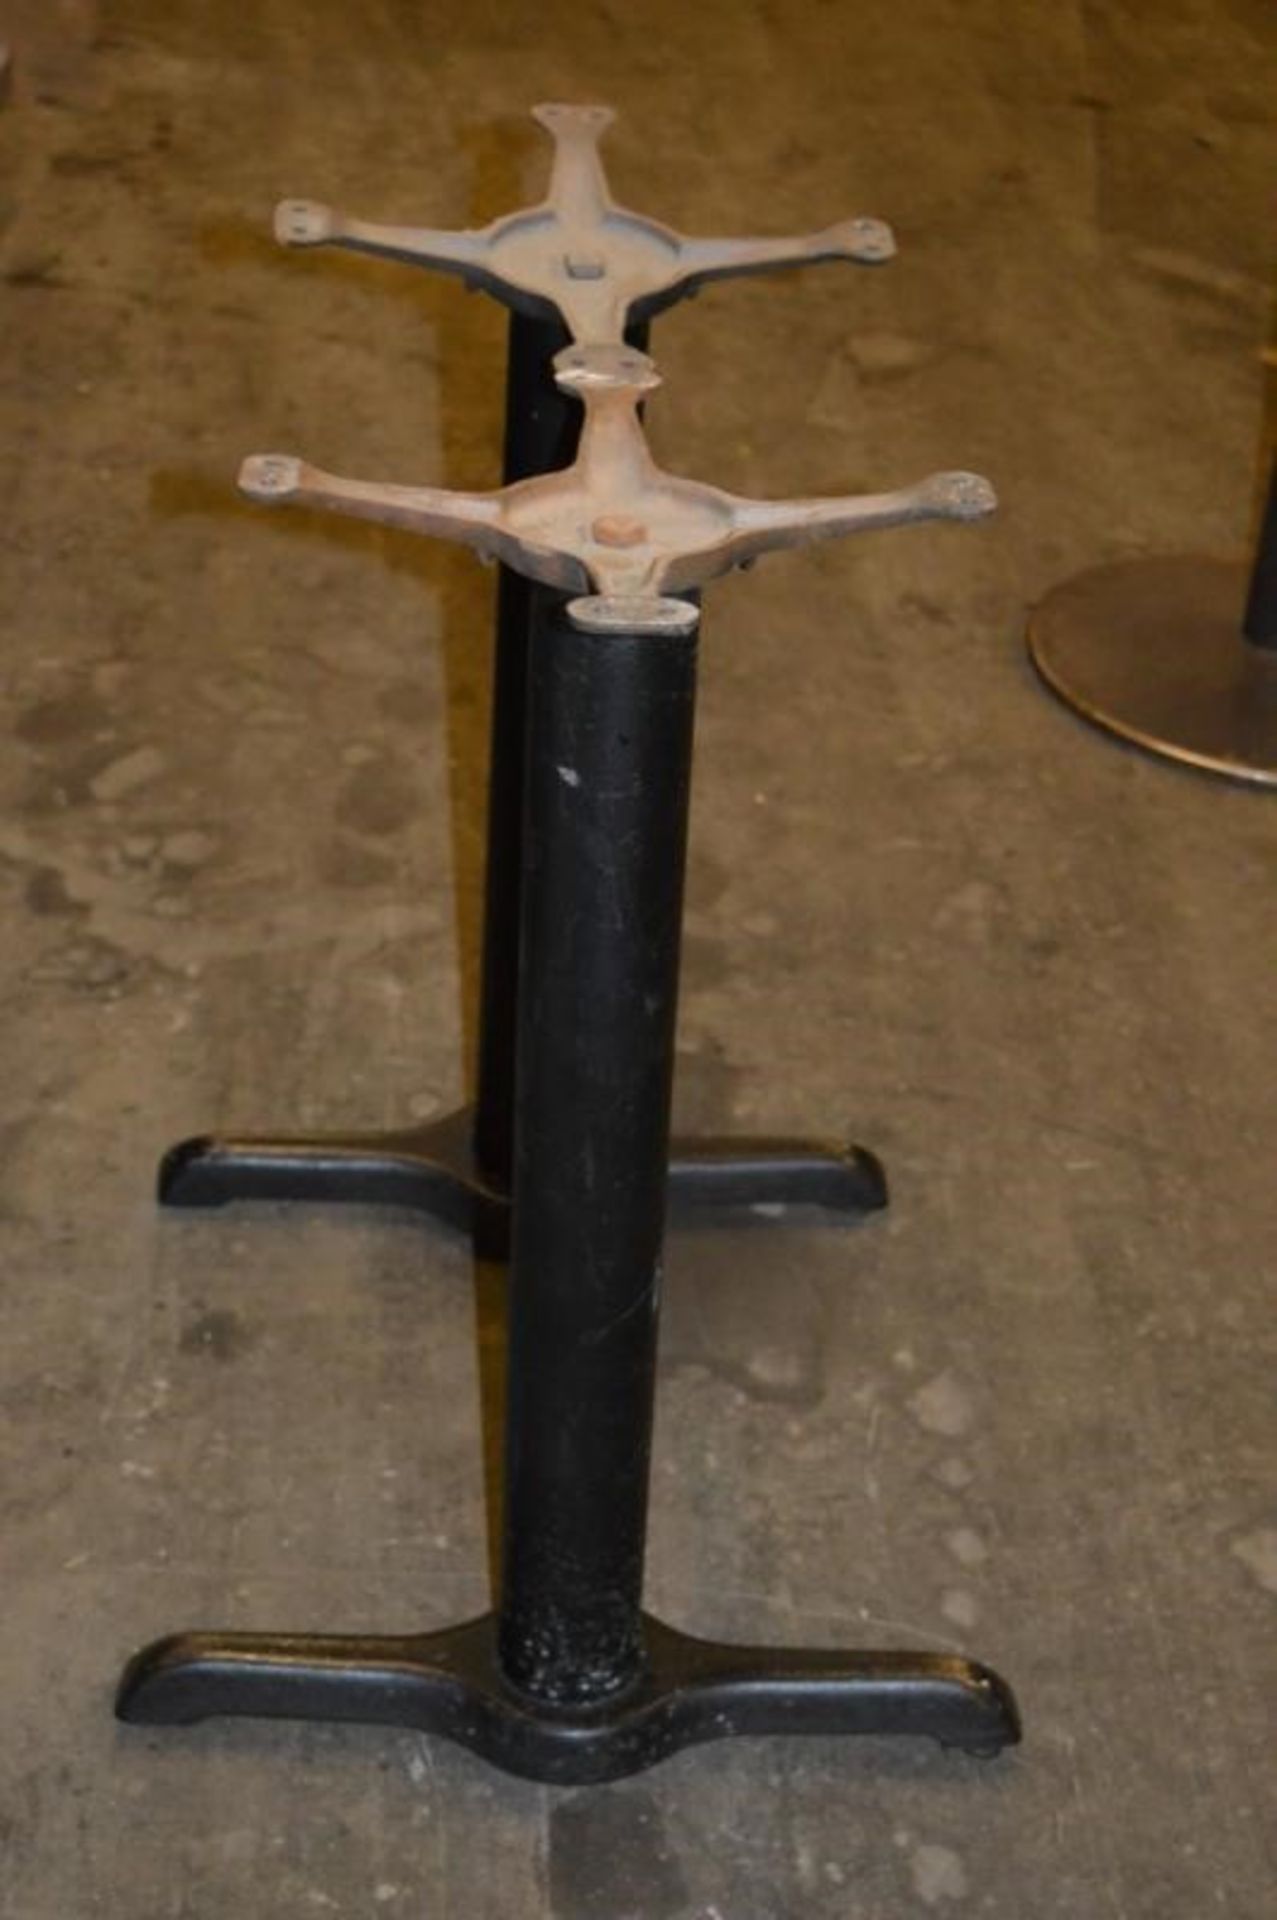 30 x Cast Iron Table Base Legs - CL297 - JP000 - Location: Bolton BL1 - Image 4 of 4